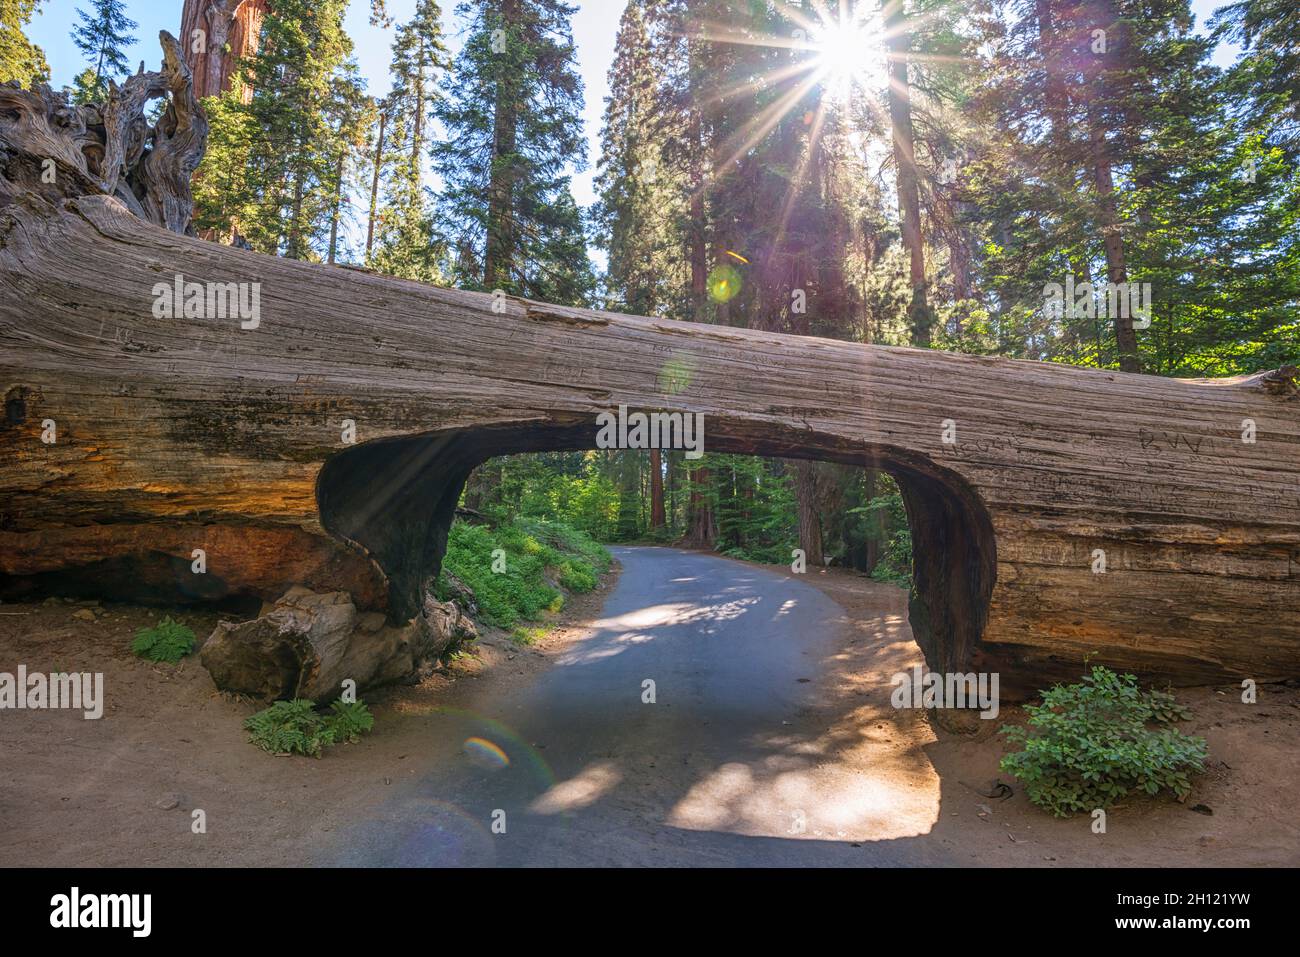 The drive through Tunnel Log at Sequoia National Park. Tulare County, CA, USA. Stock Photo